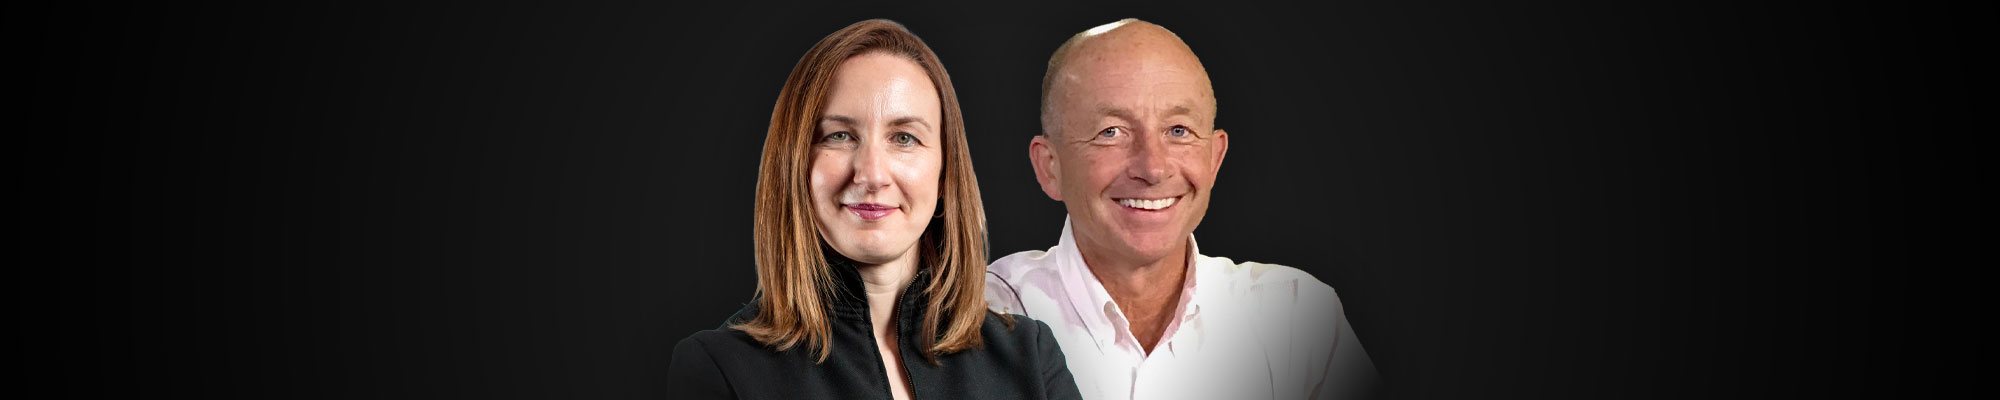 Shaun Kniffin & Natalia Giner: Exploring the Role of Technology in Meeting Client Expectations